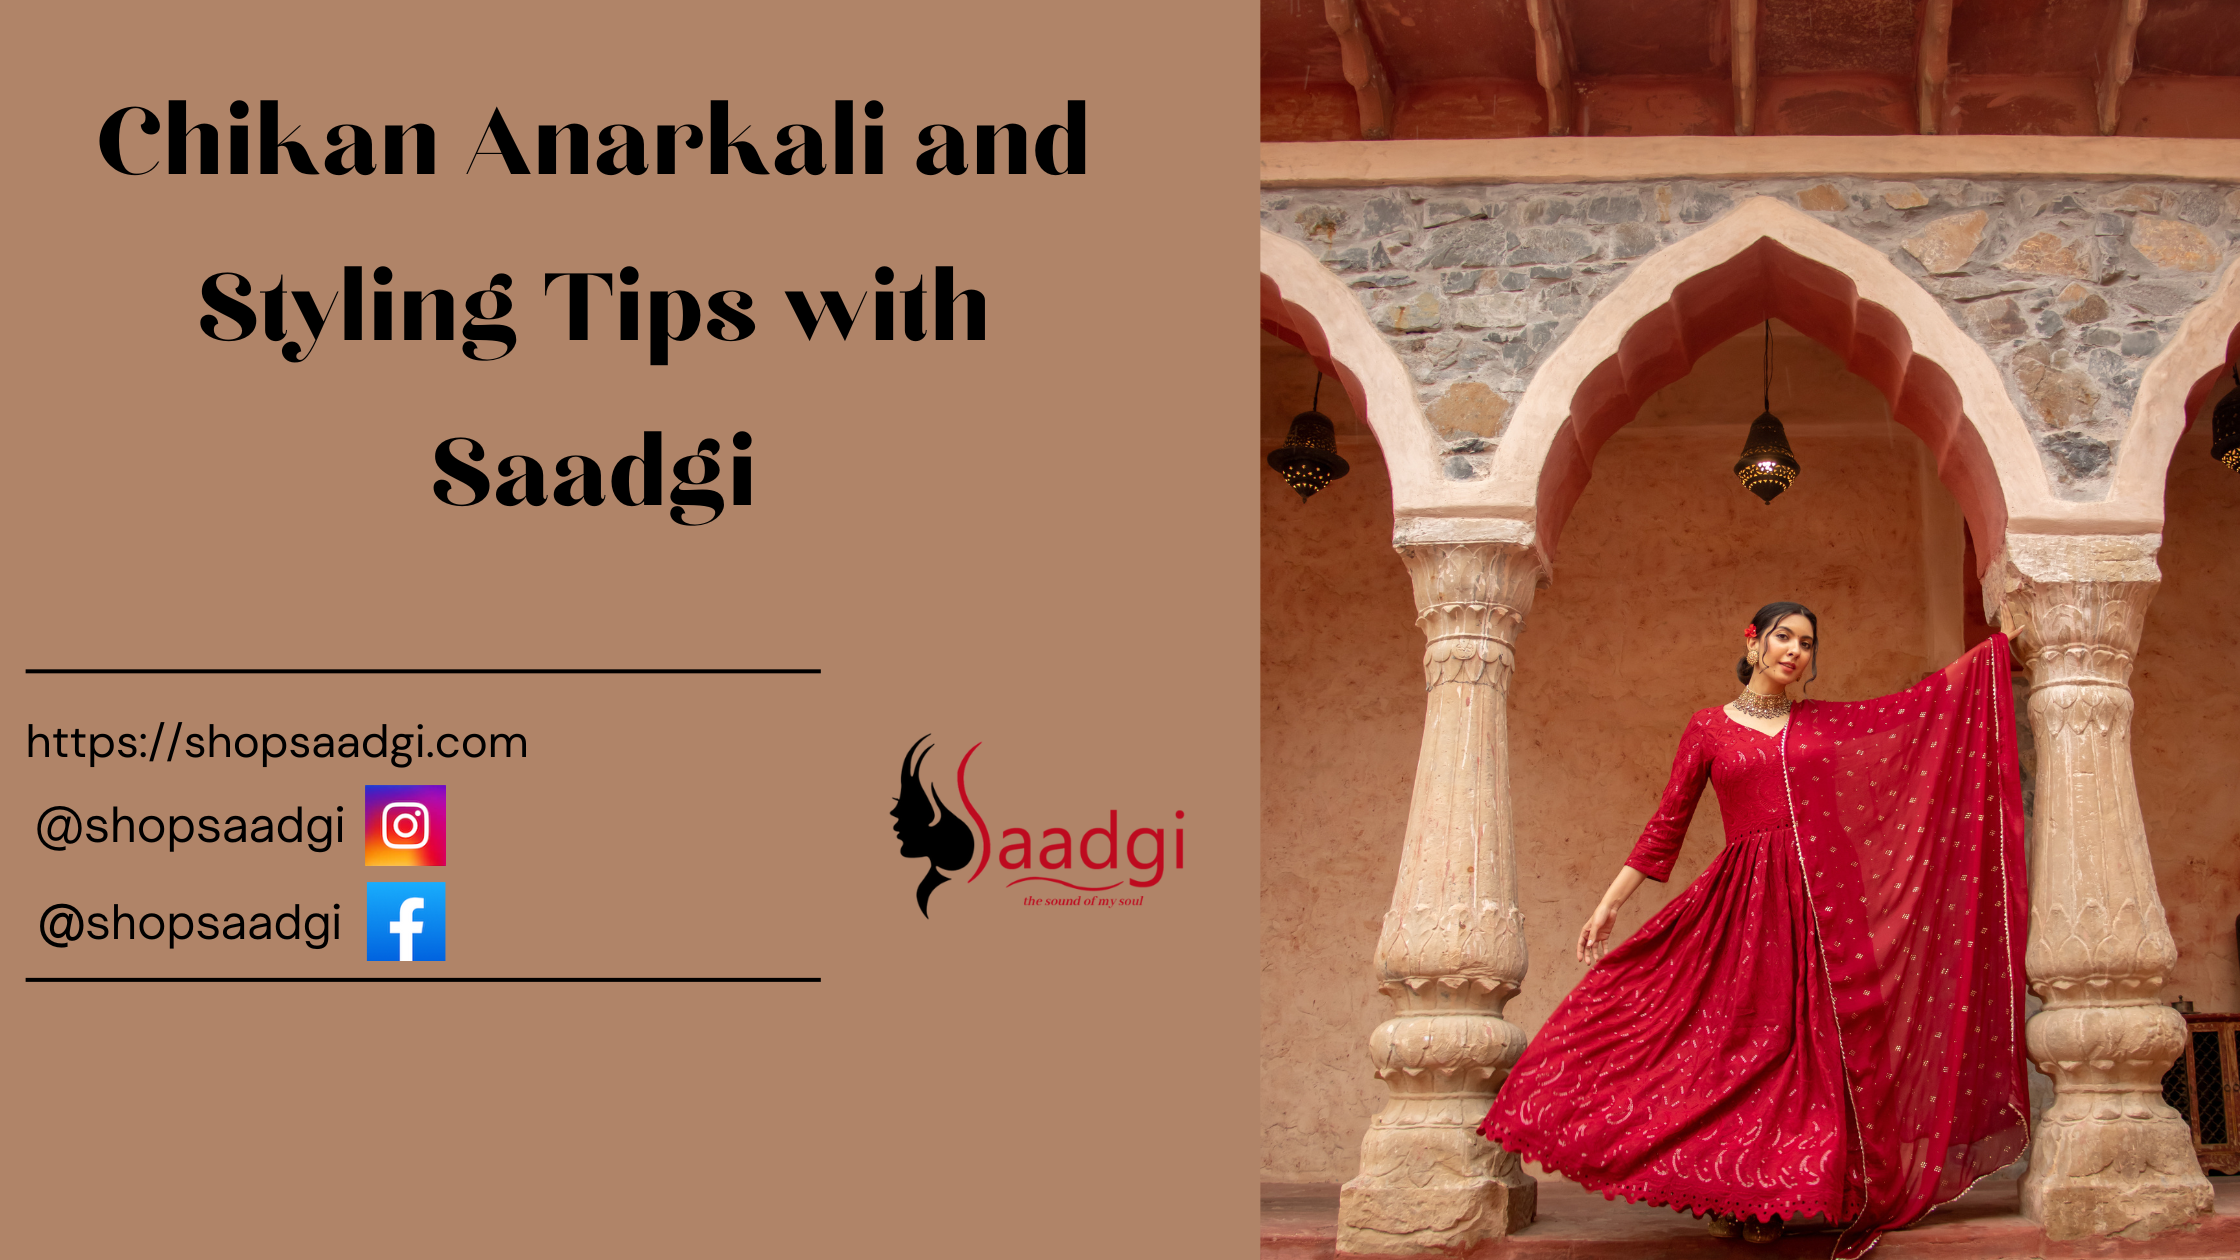 Chikan Anarkali and Styling Tips with Saadgi